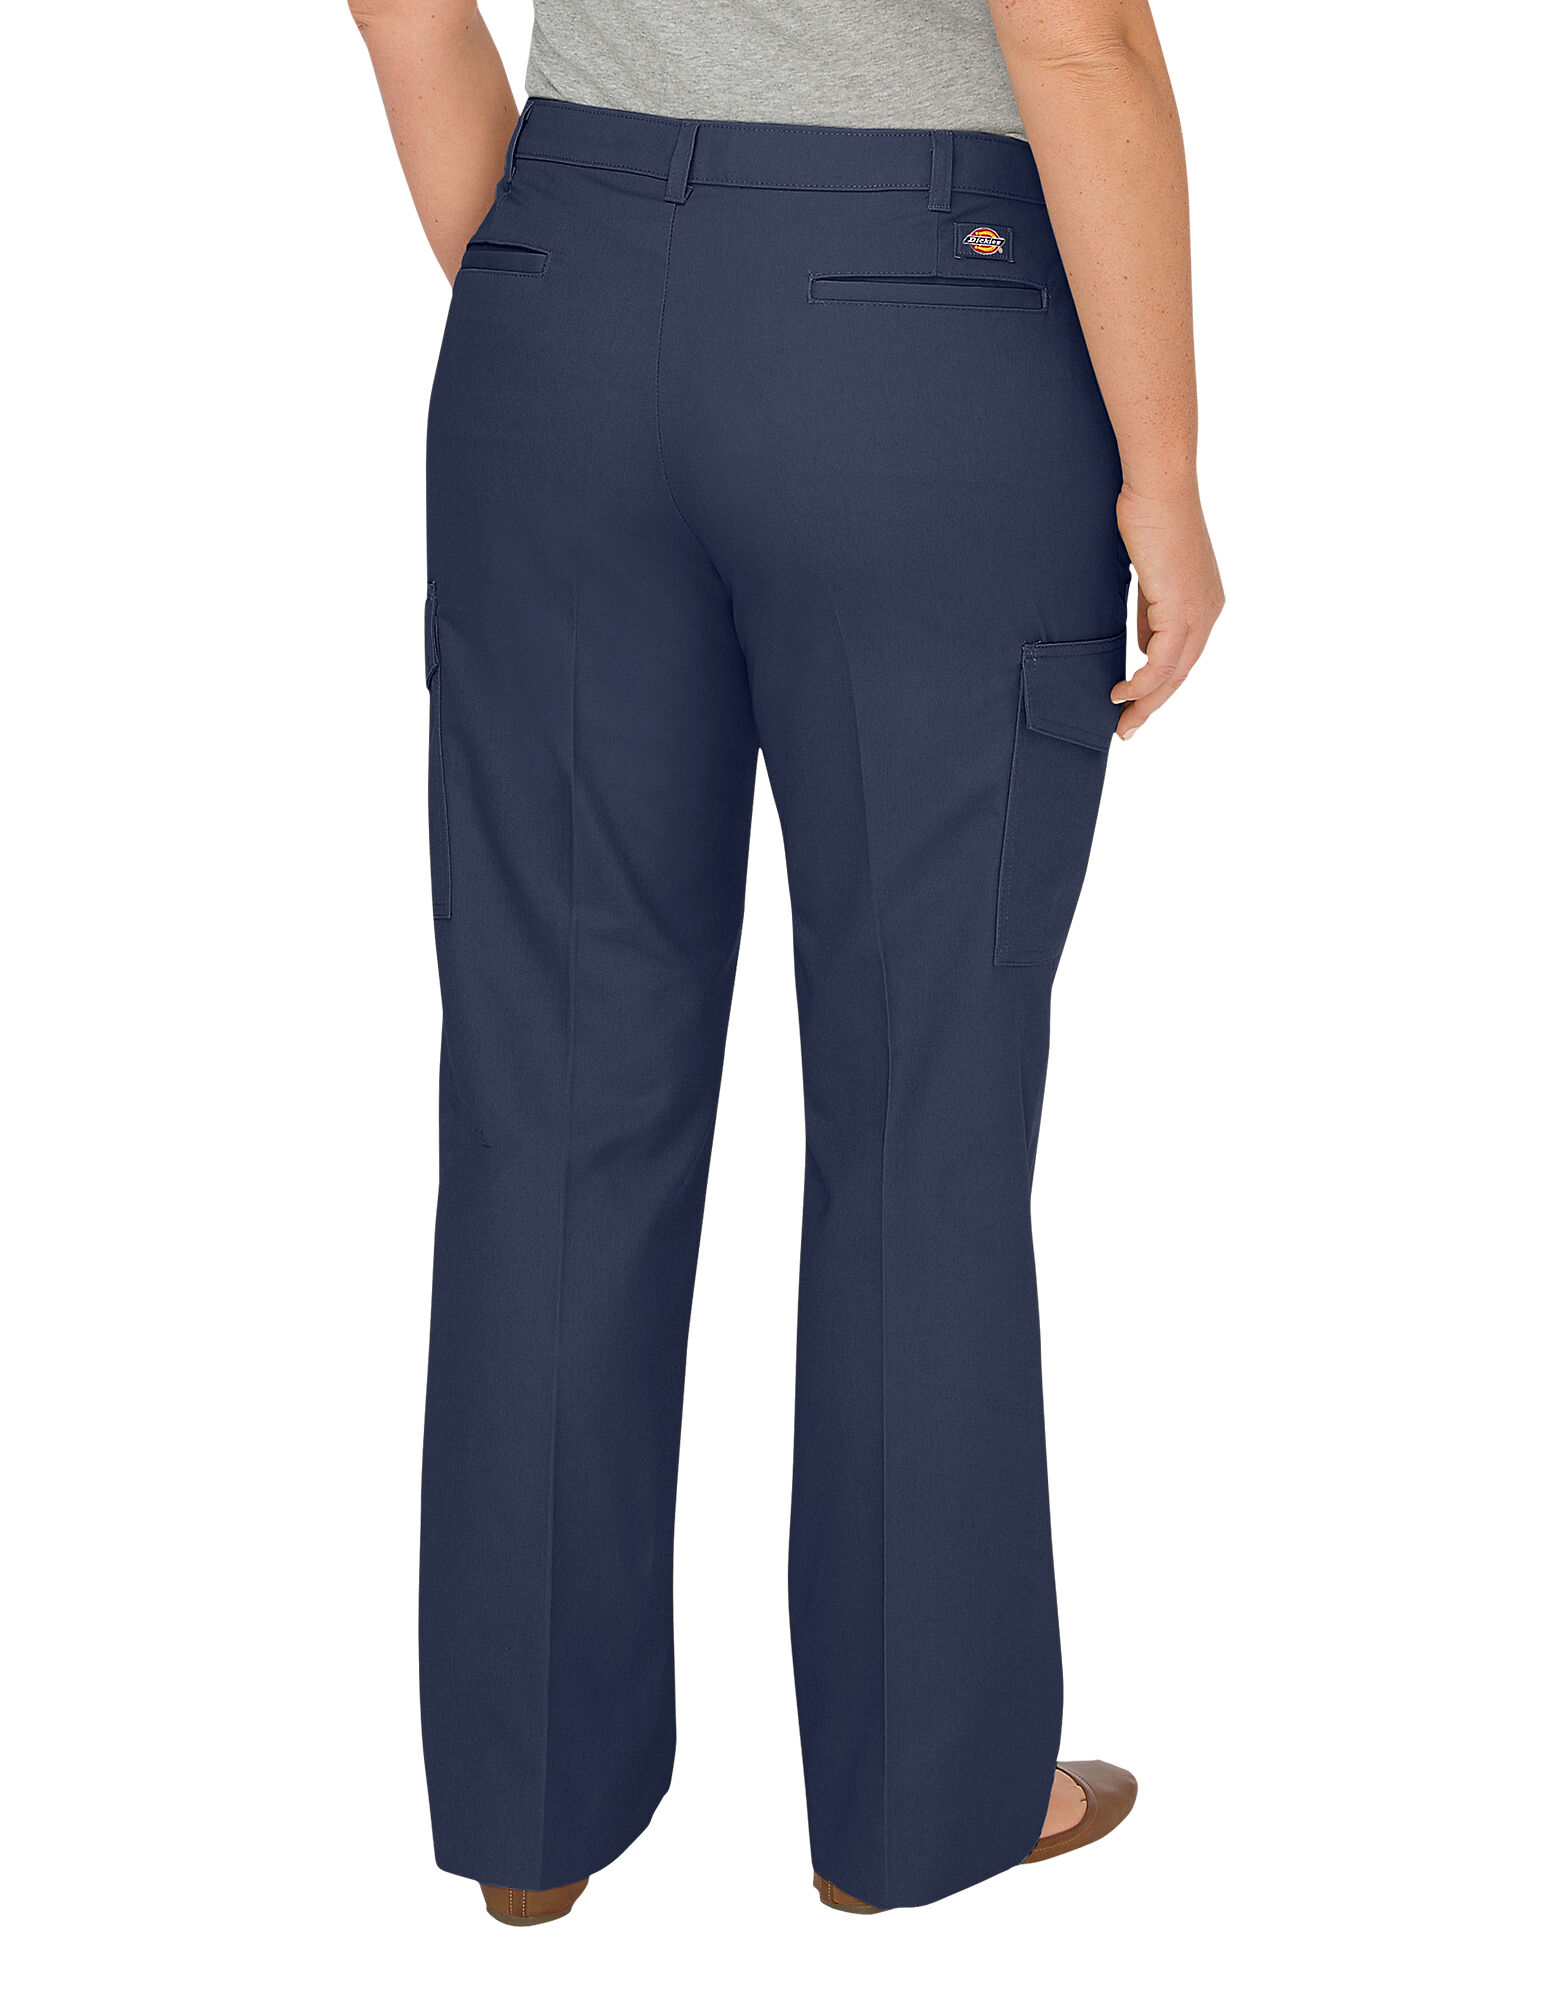 Women's Relaxed Straight Server Cargo Pants (Plus) Navy Blue | Dickies